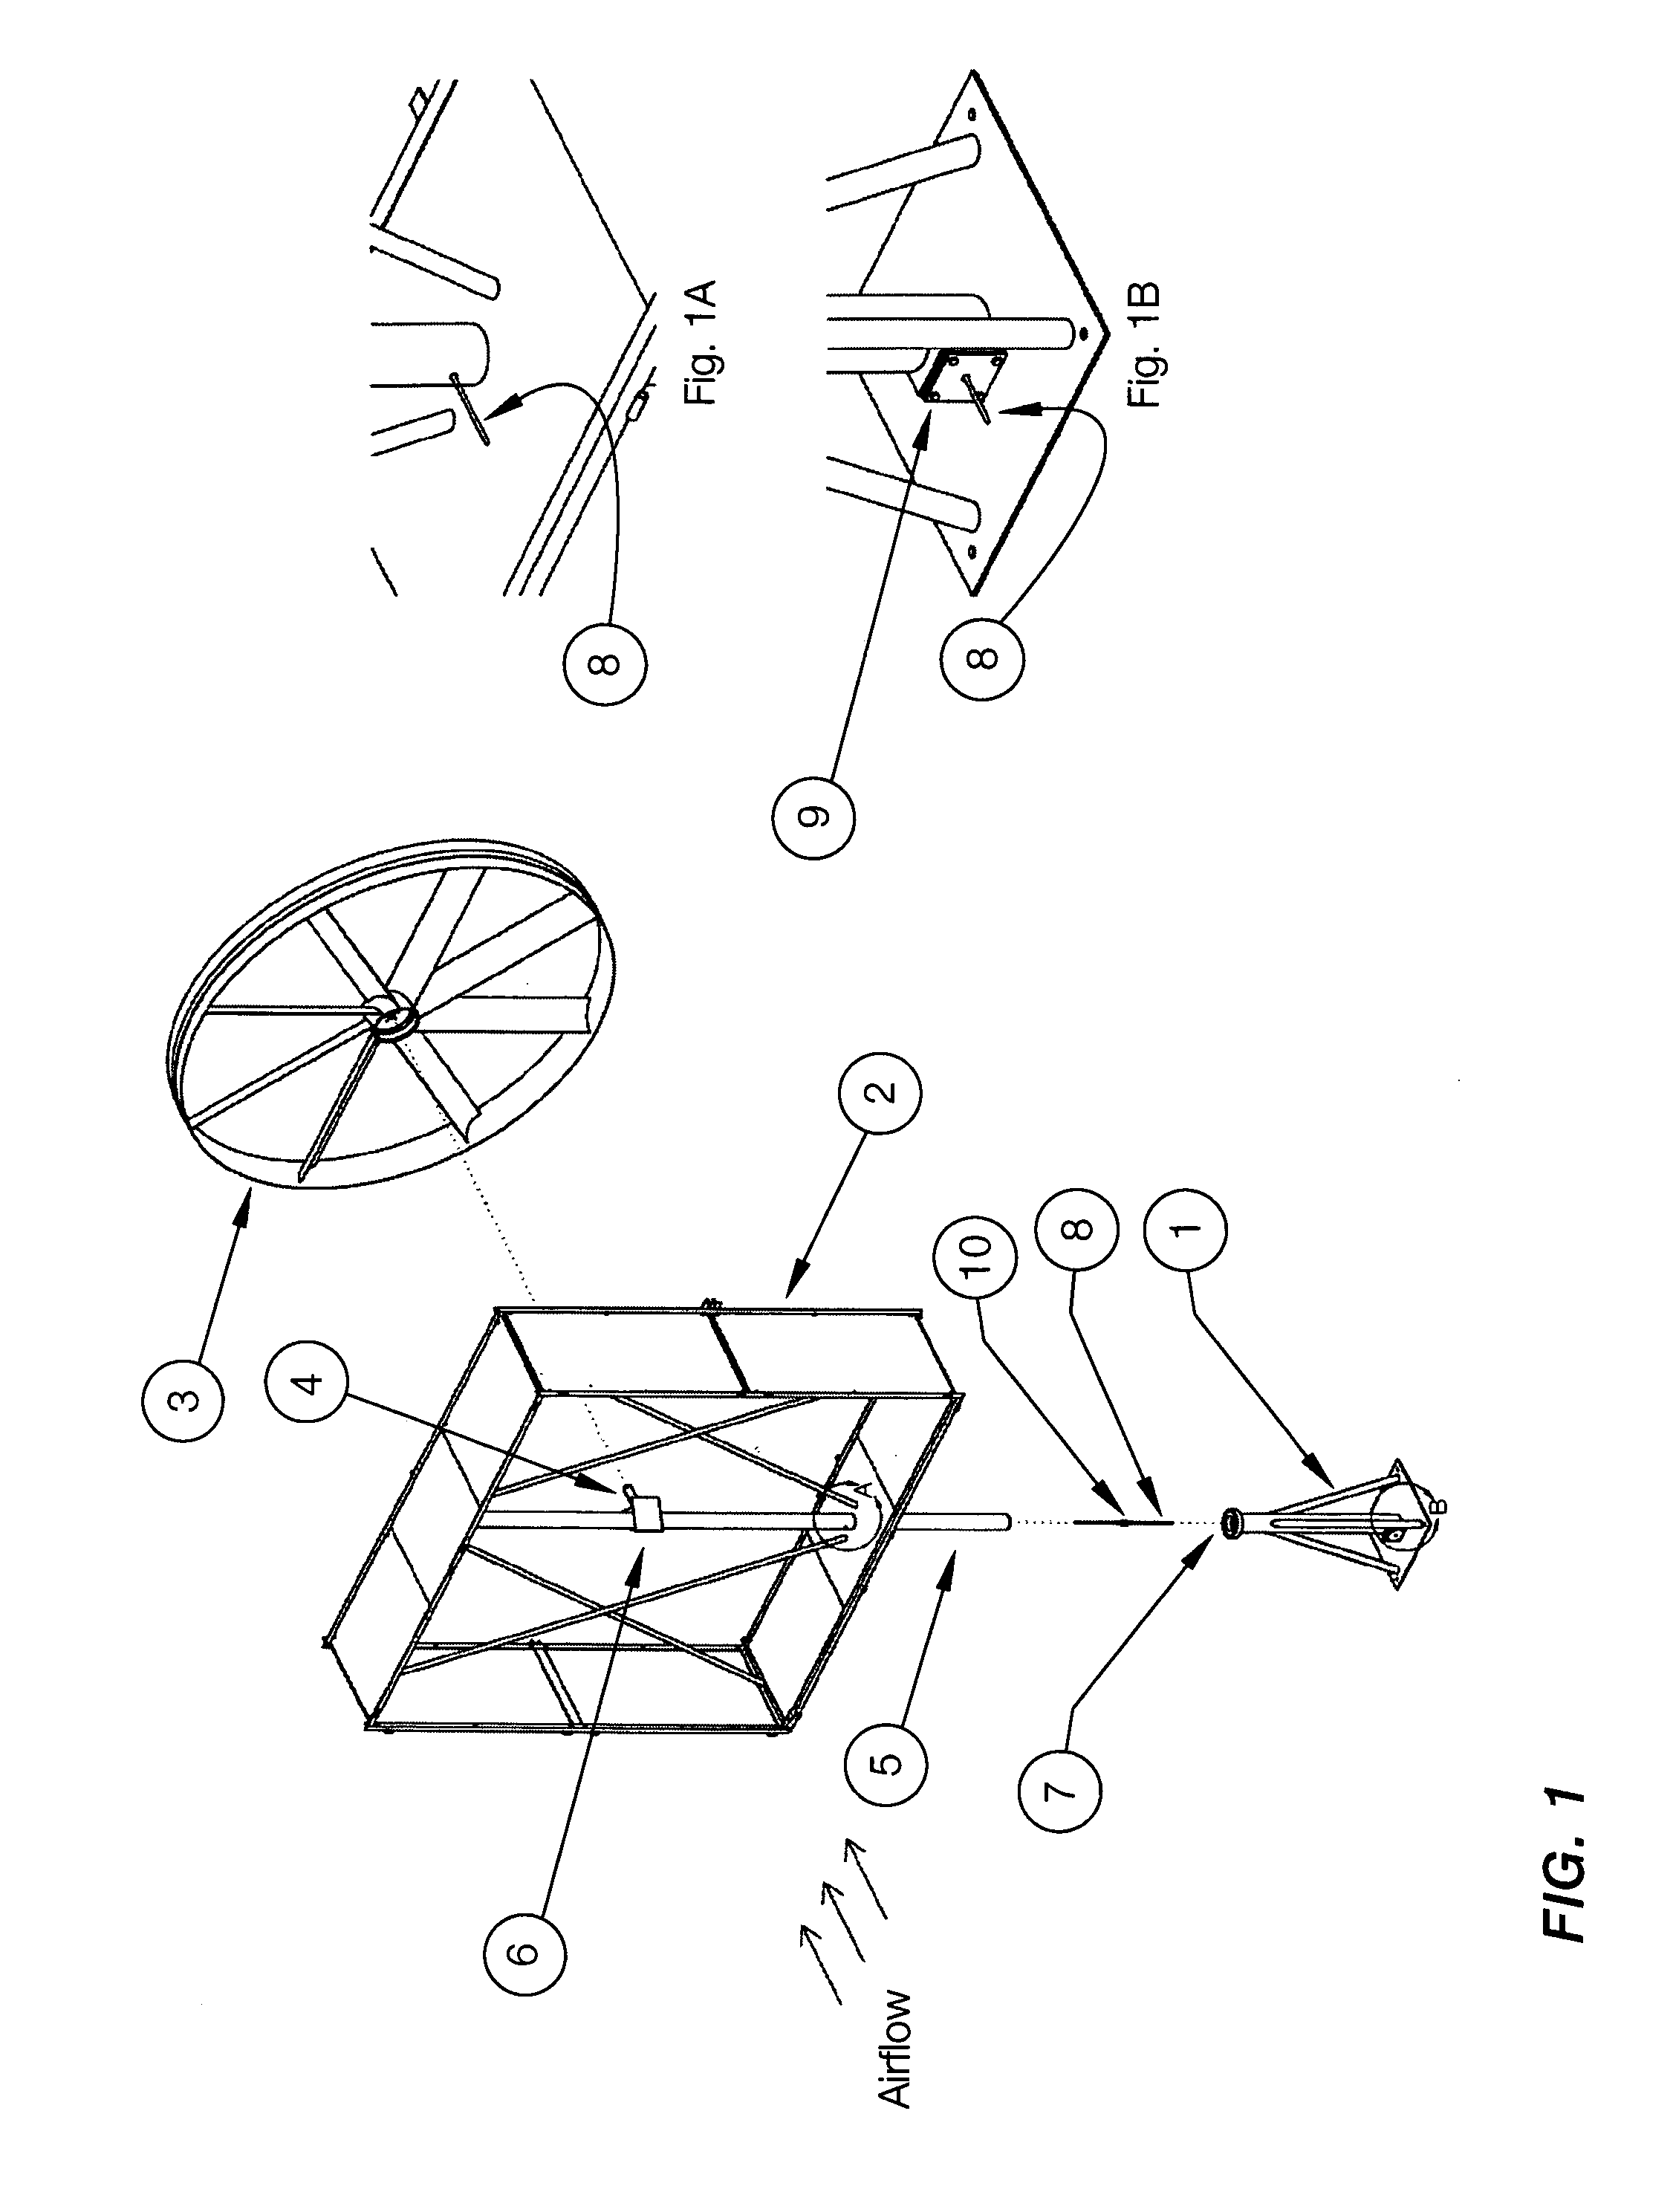 Variable aperture velocity augmented ducted fan wind turbine